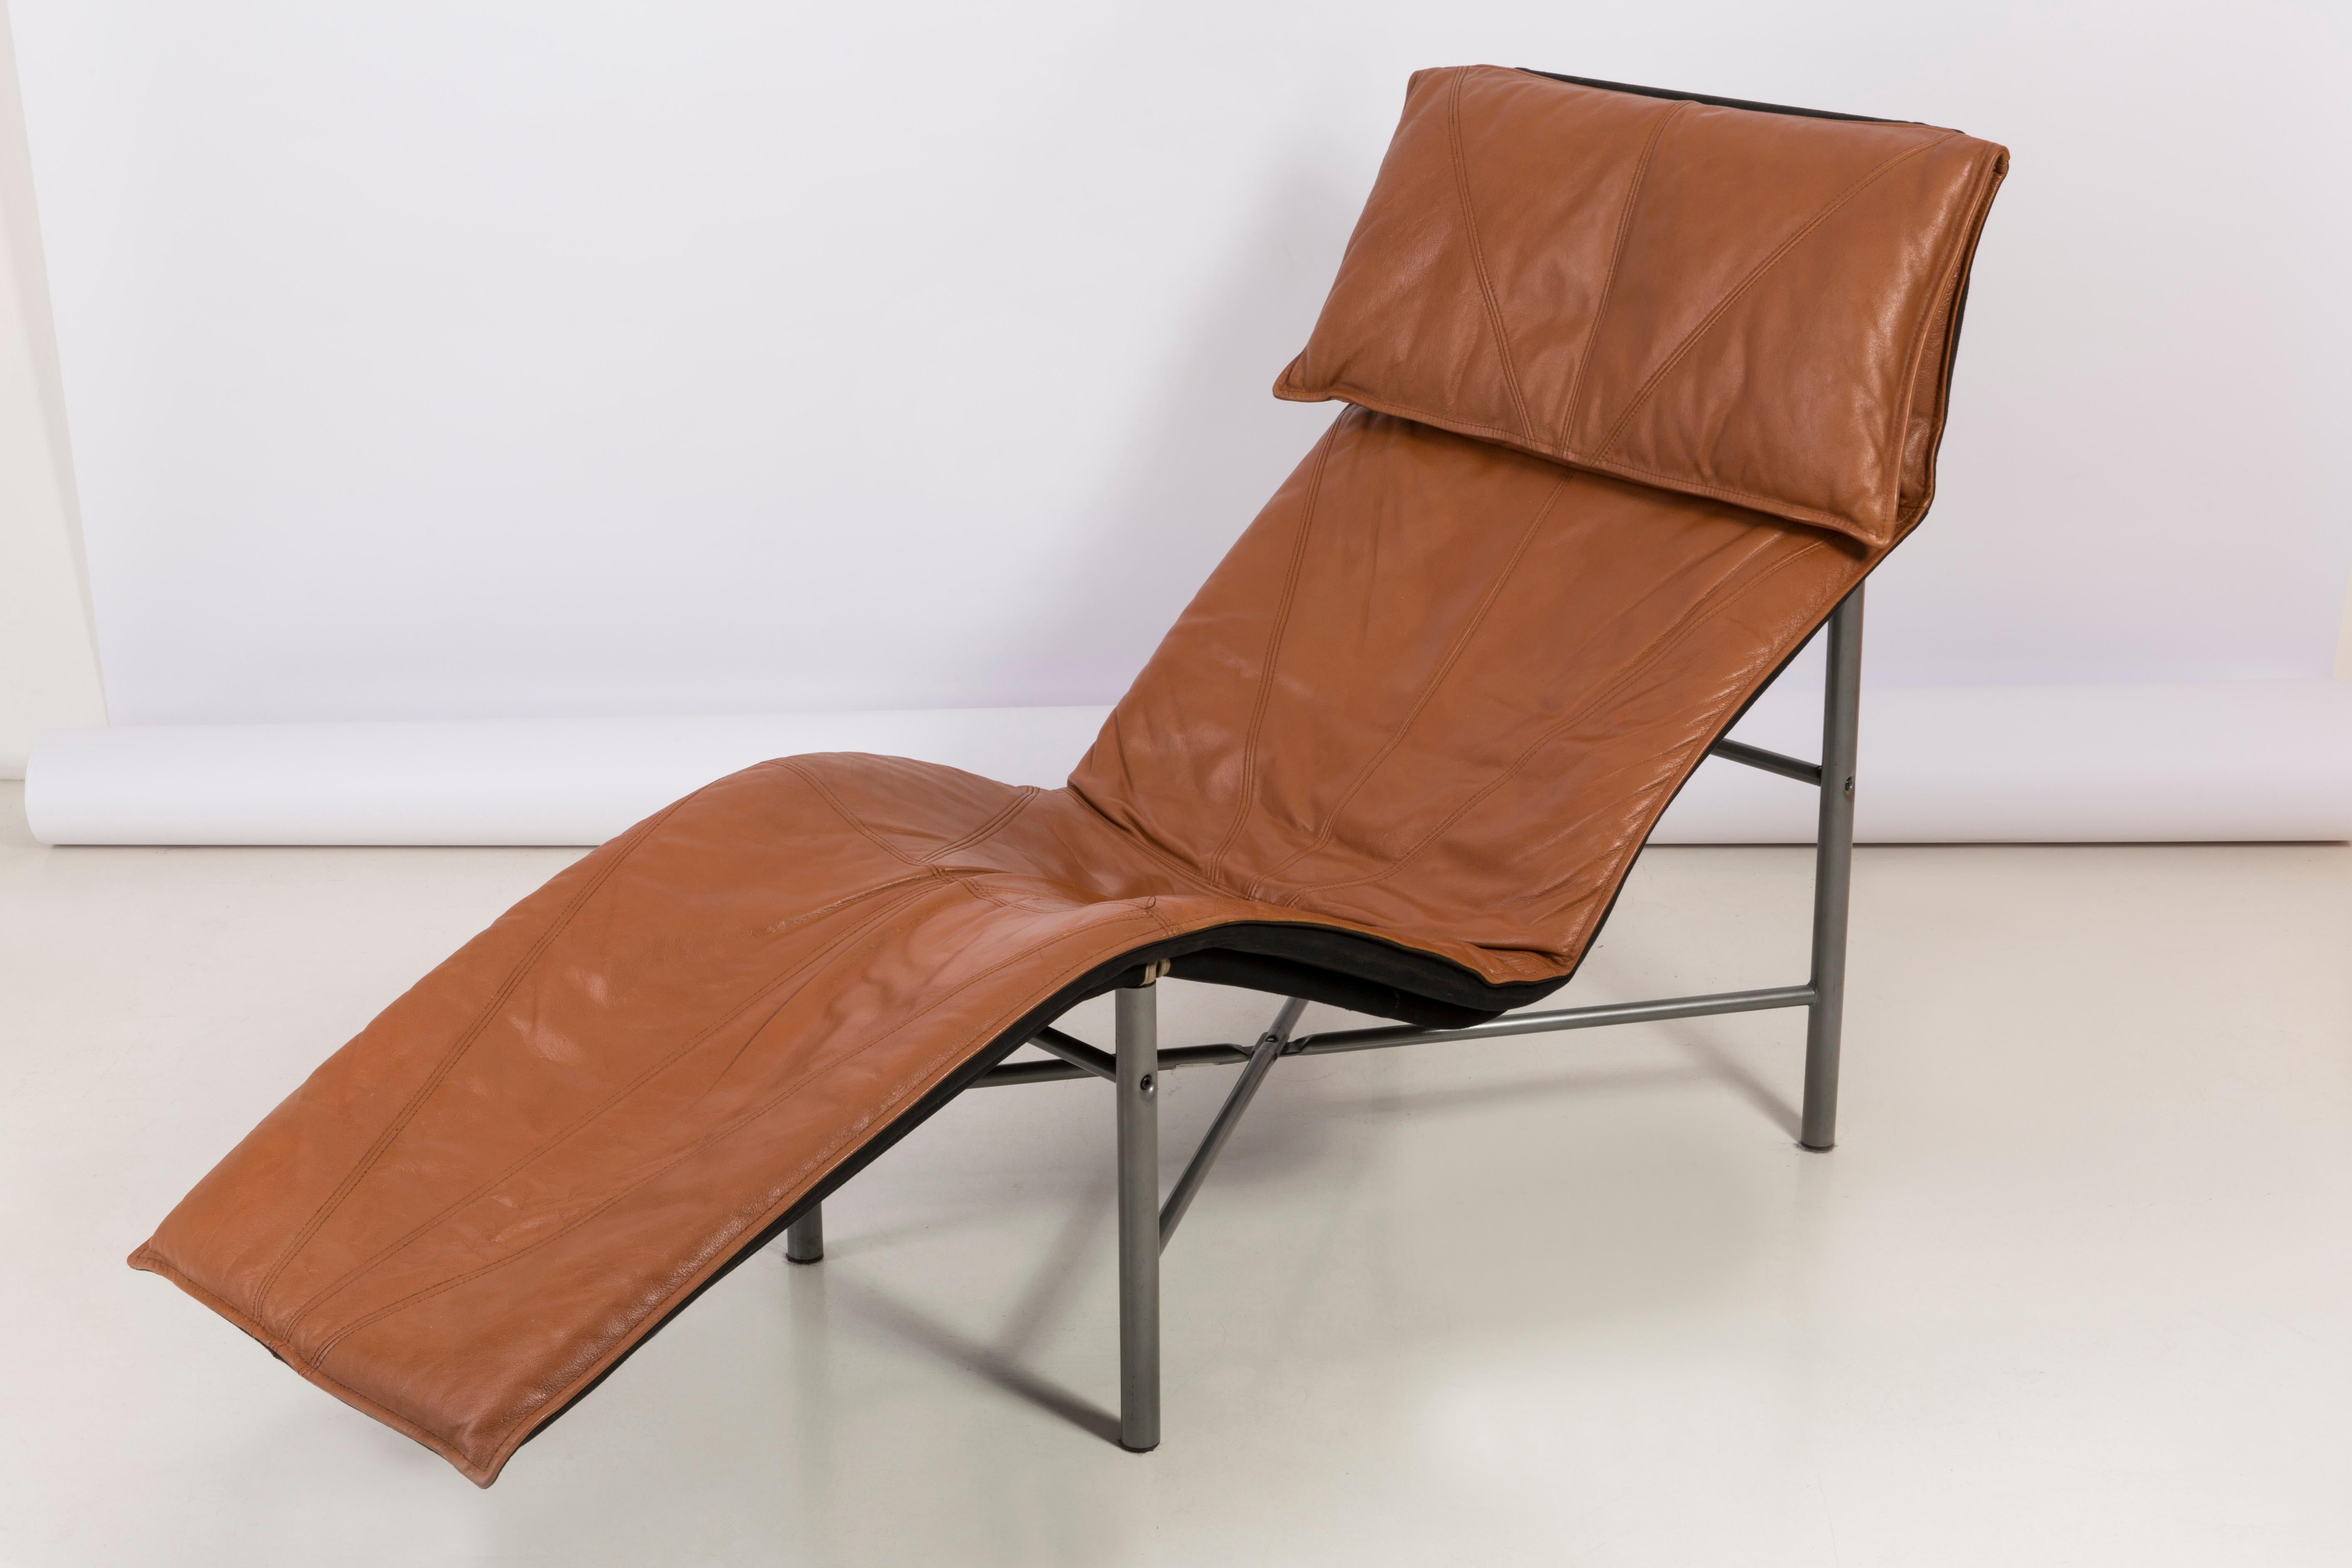 Two Midcentury Danish Modern Leather Chaise Lounge Chairs, Tord Björklund, 1980 For Sale 4